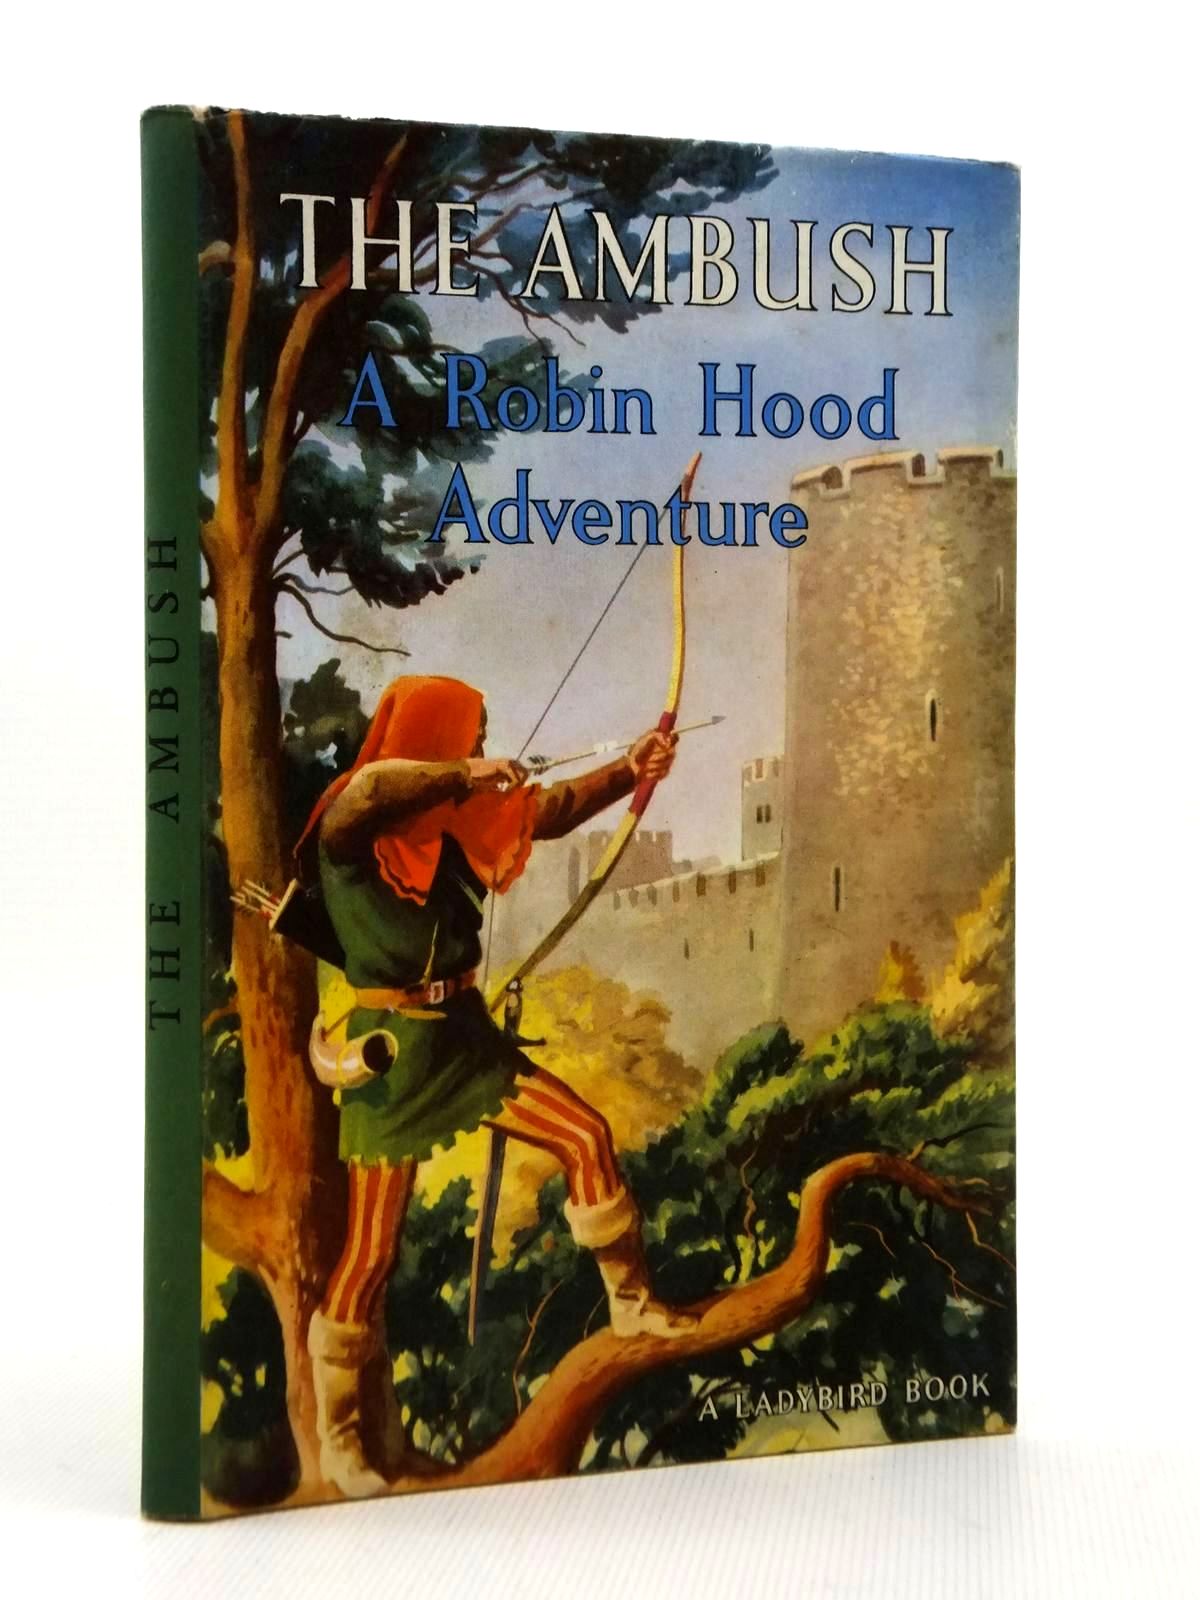 Photo of THE AMBUSH written by Kester, Max illustrated by Kenney, John published by Wills & Hepworth Ltd. (STOCK CODE: 1316852)  for sale by Stella & Rose's Books